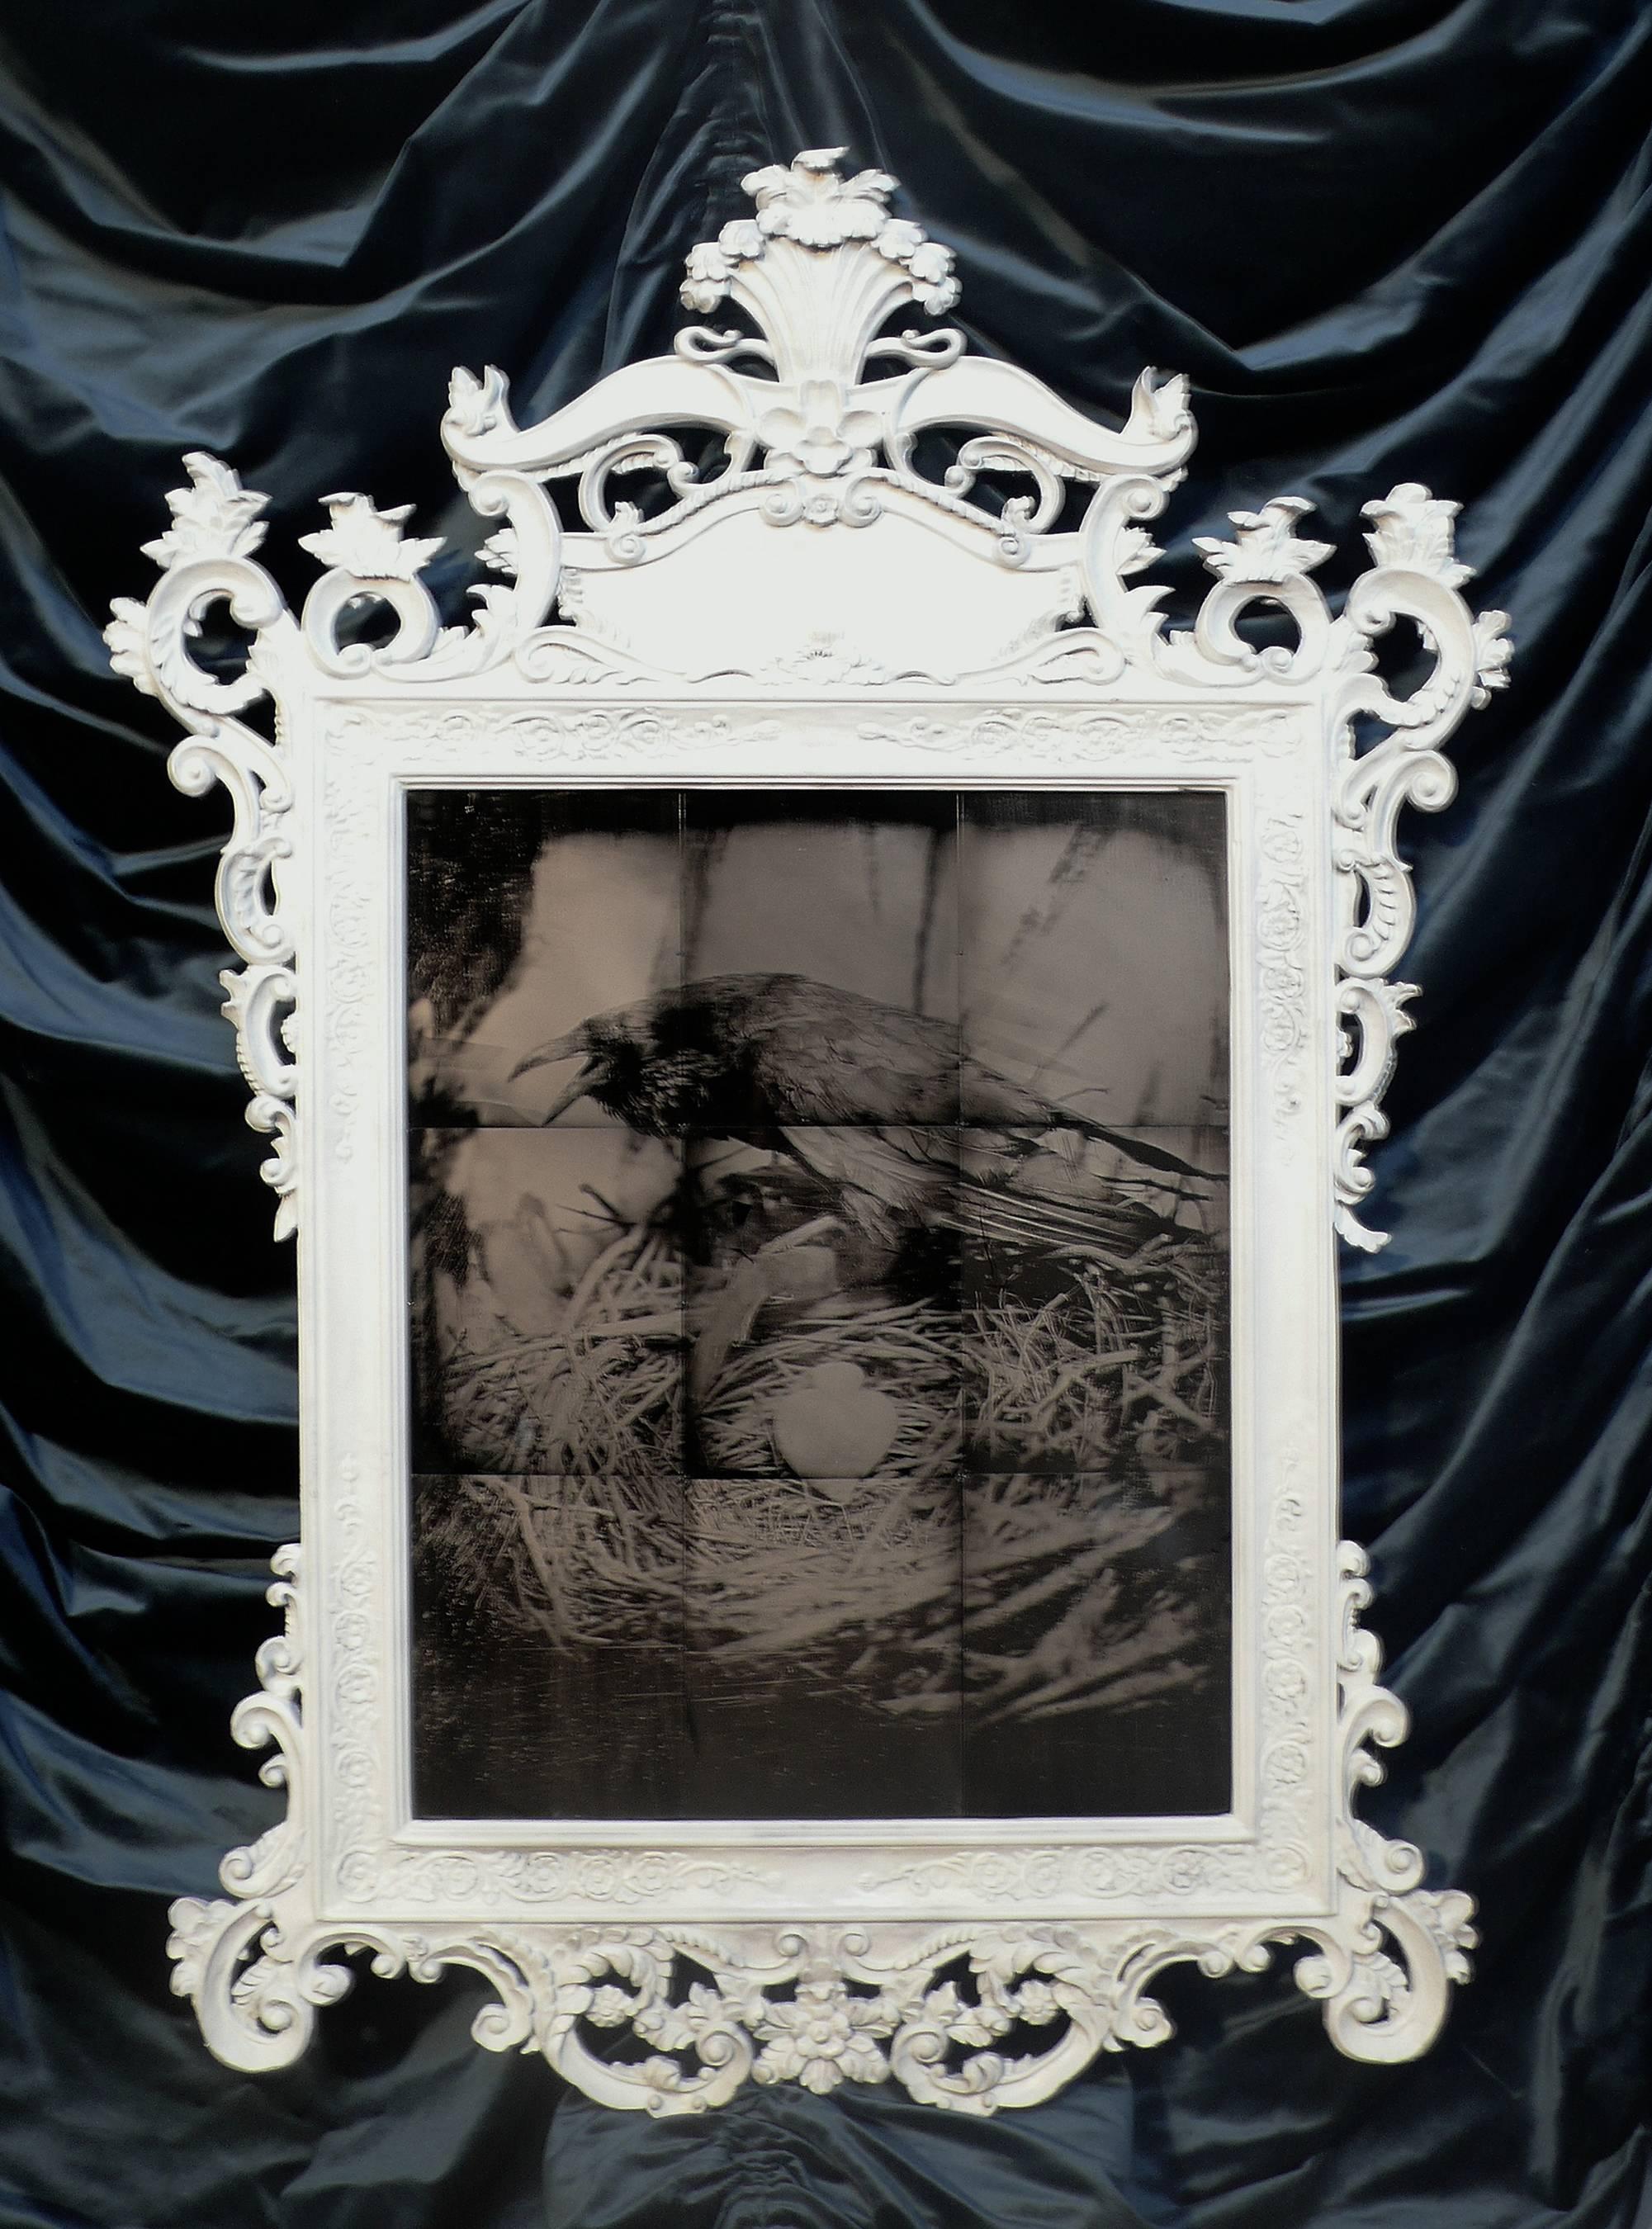 Wehrfritz's visual art practice has evolved from performance pieces presented as live theatrical works, to installation, and now to tableaux vivants on Daguerreotype plates and wet plate collodion. His work on Campos Magneticos, a collaboration with